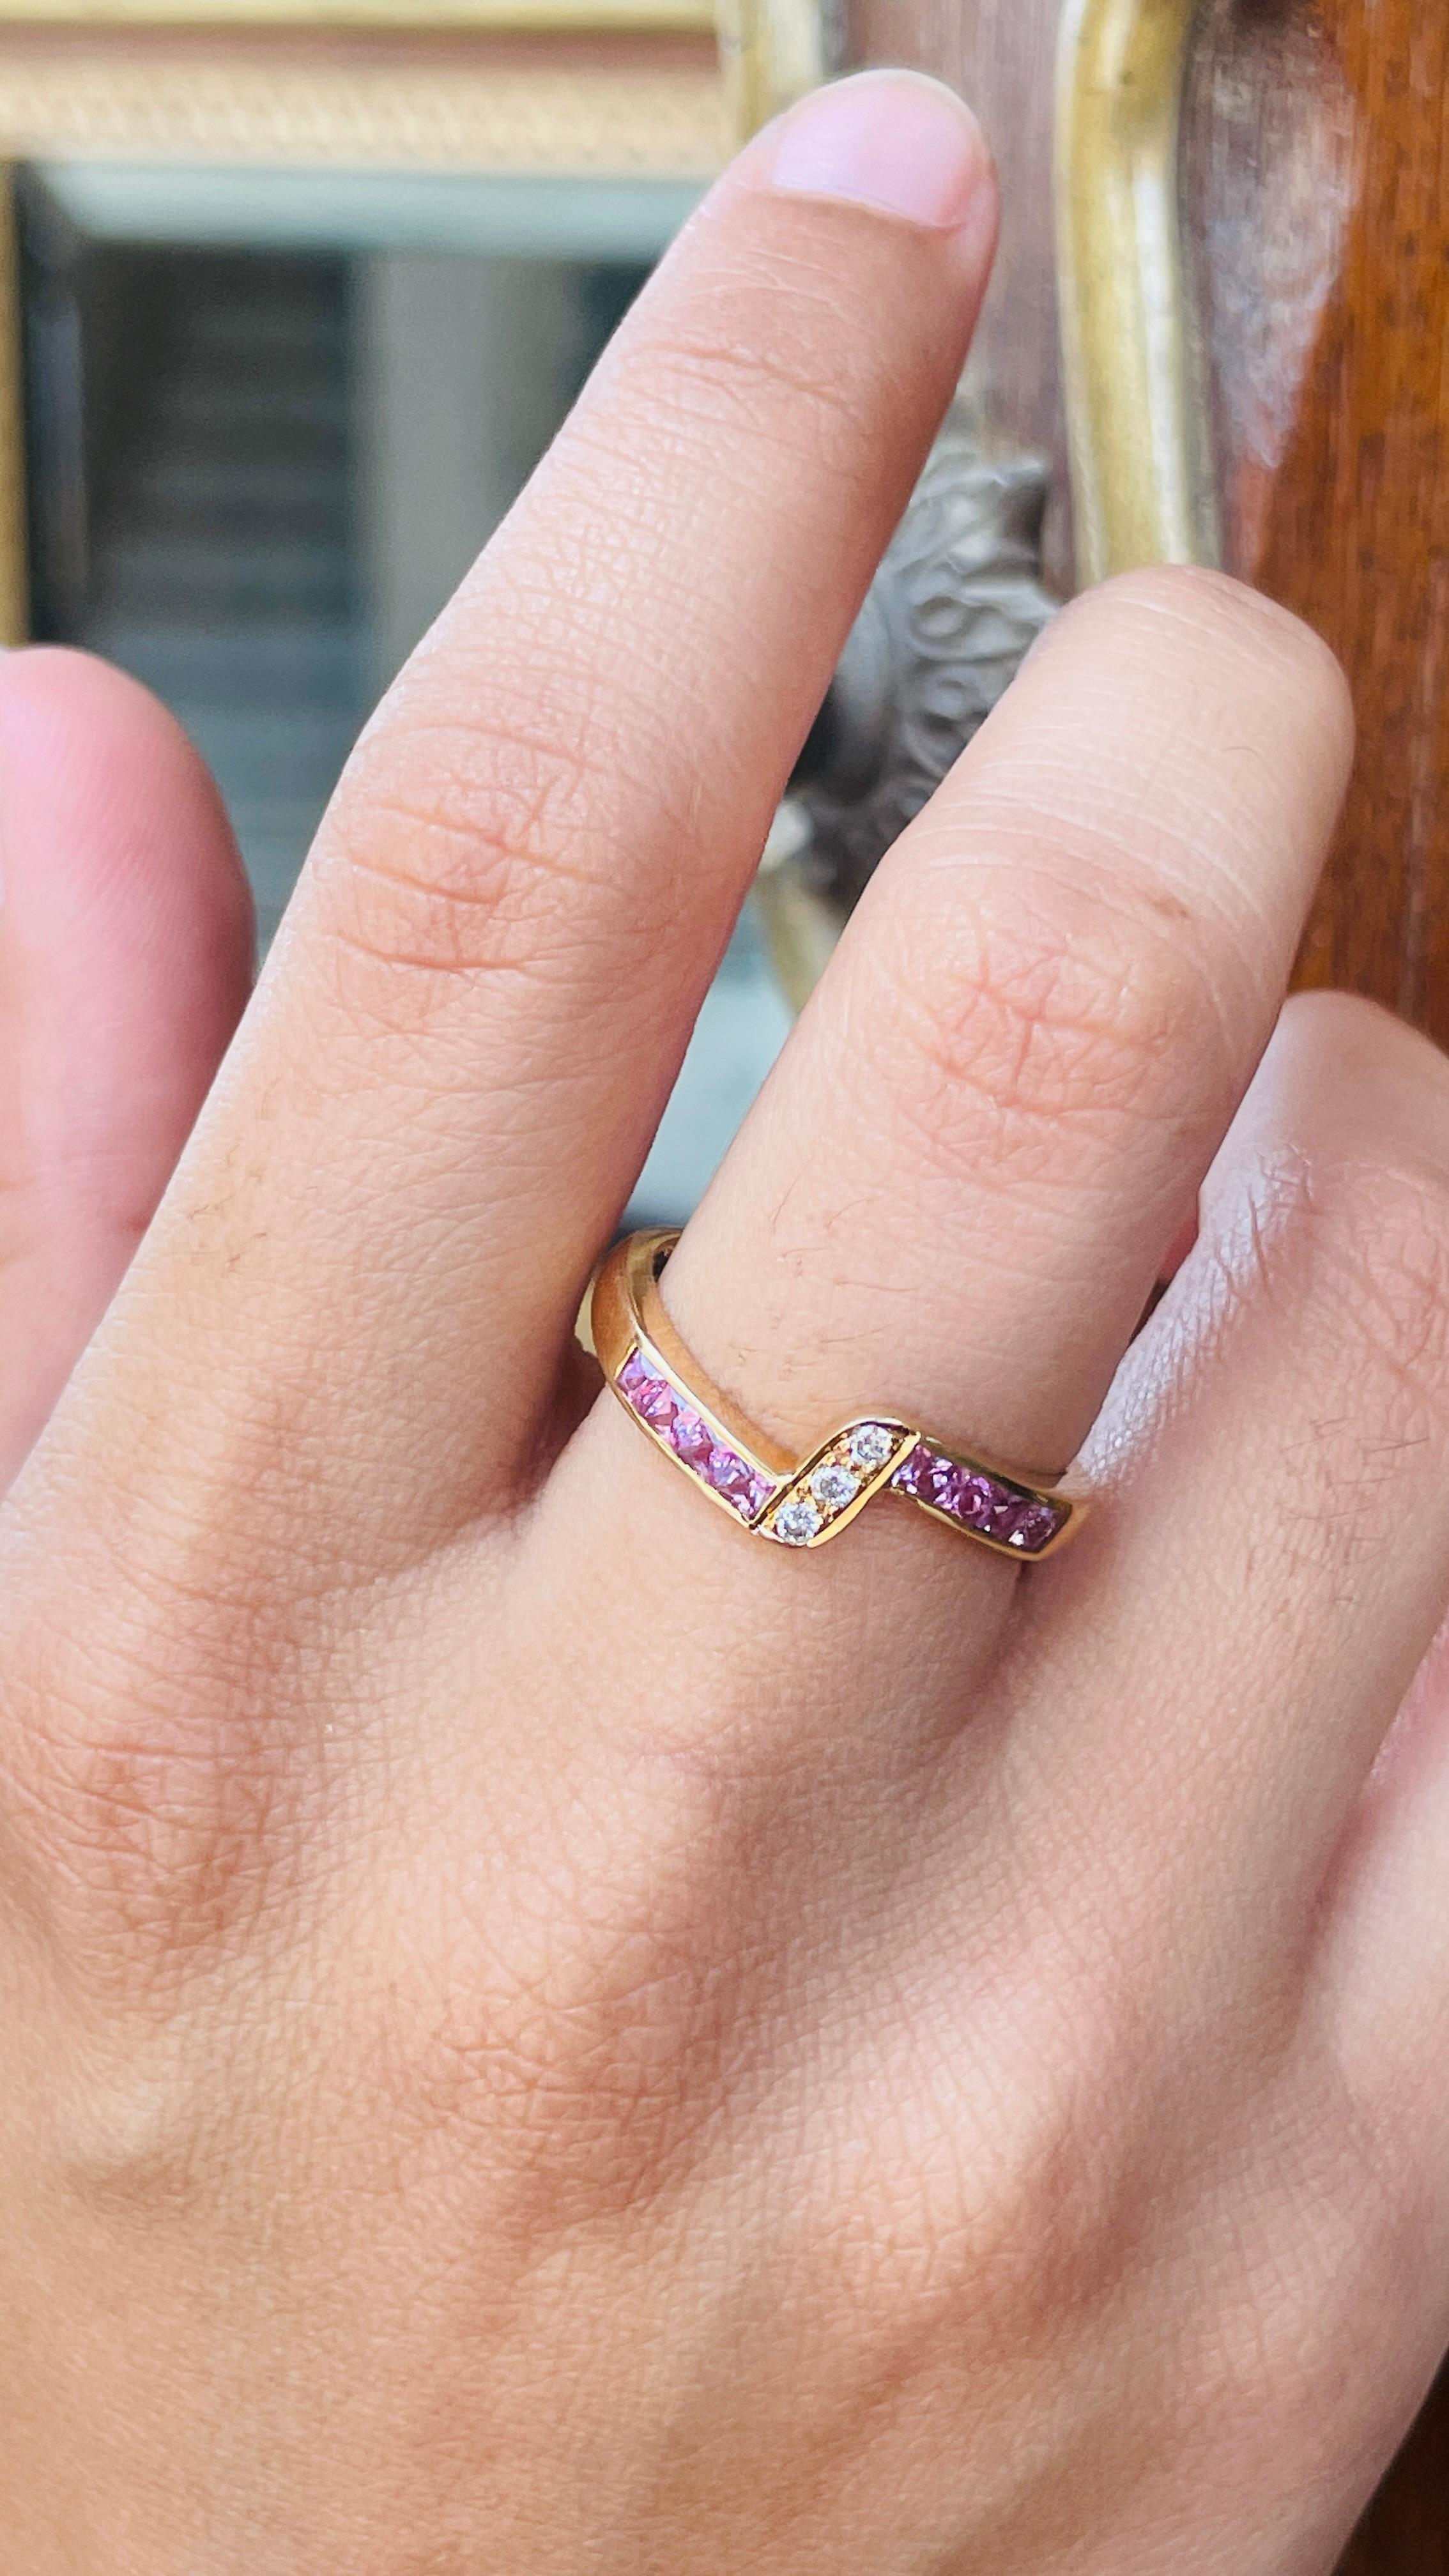 For Sale:  Genuine Diamond and Pink Sapphire Stackable Ring in 14K Yellow Gold 7